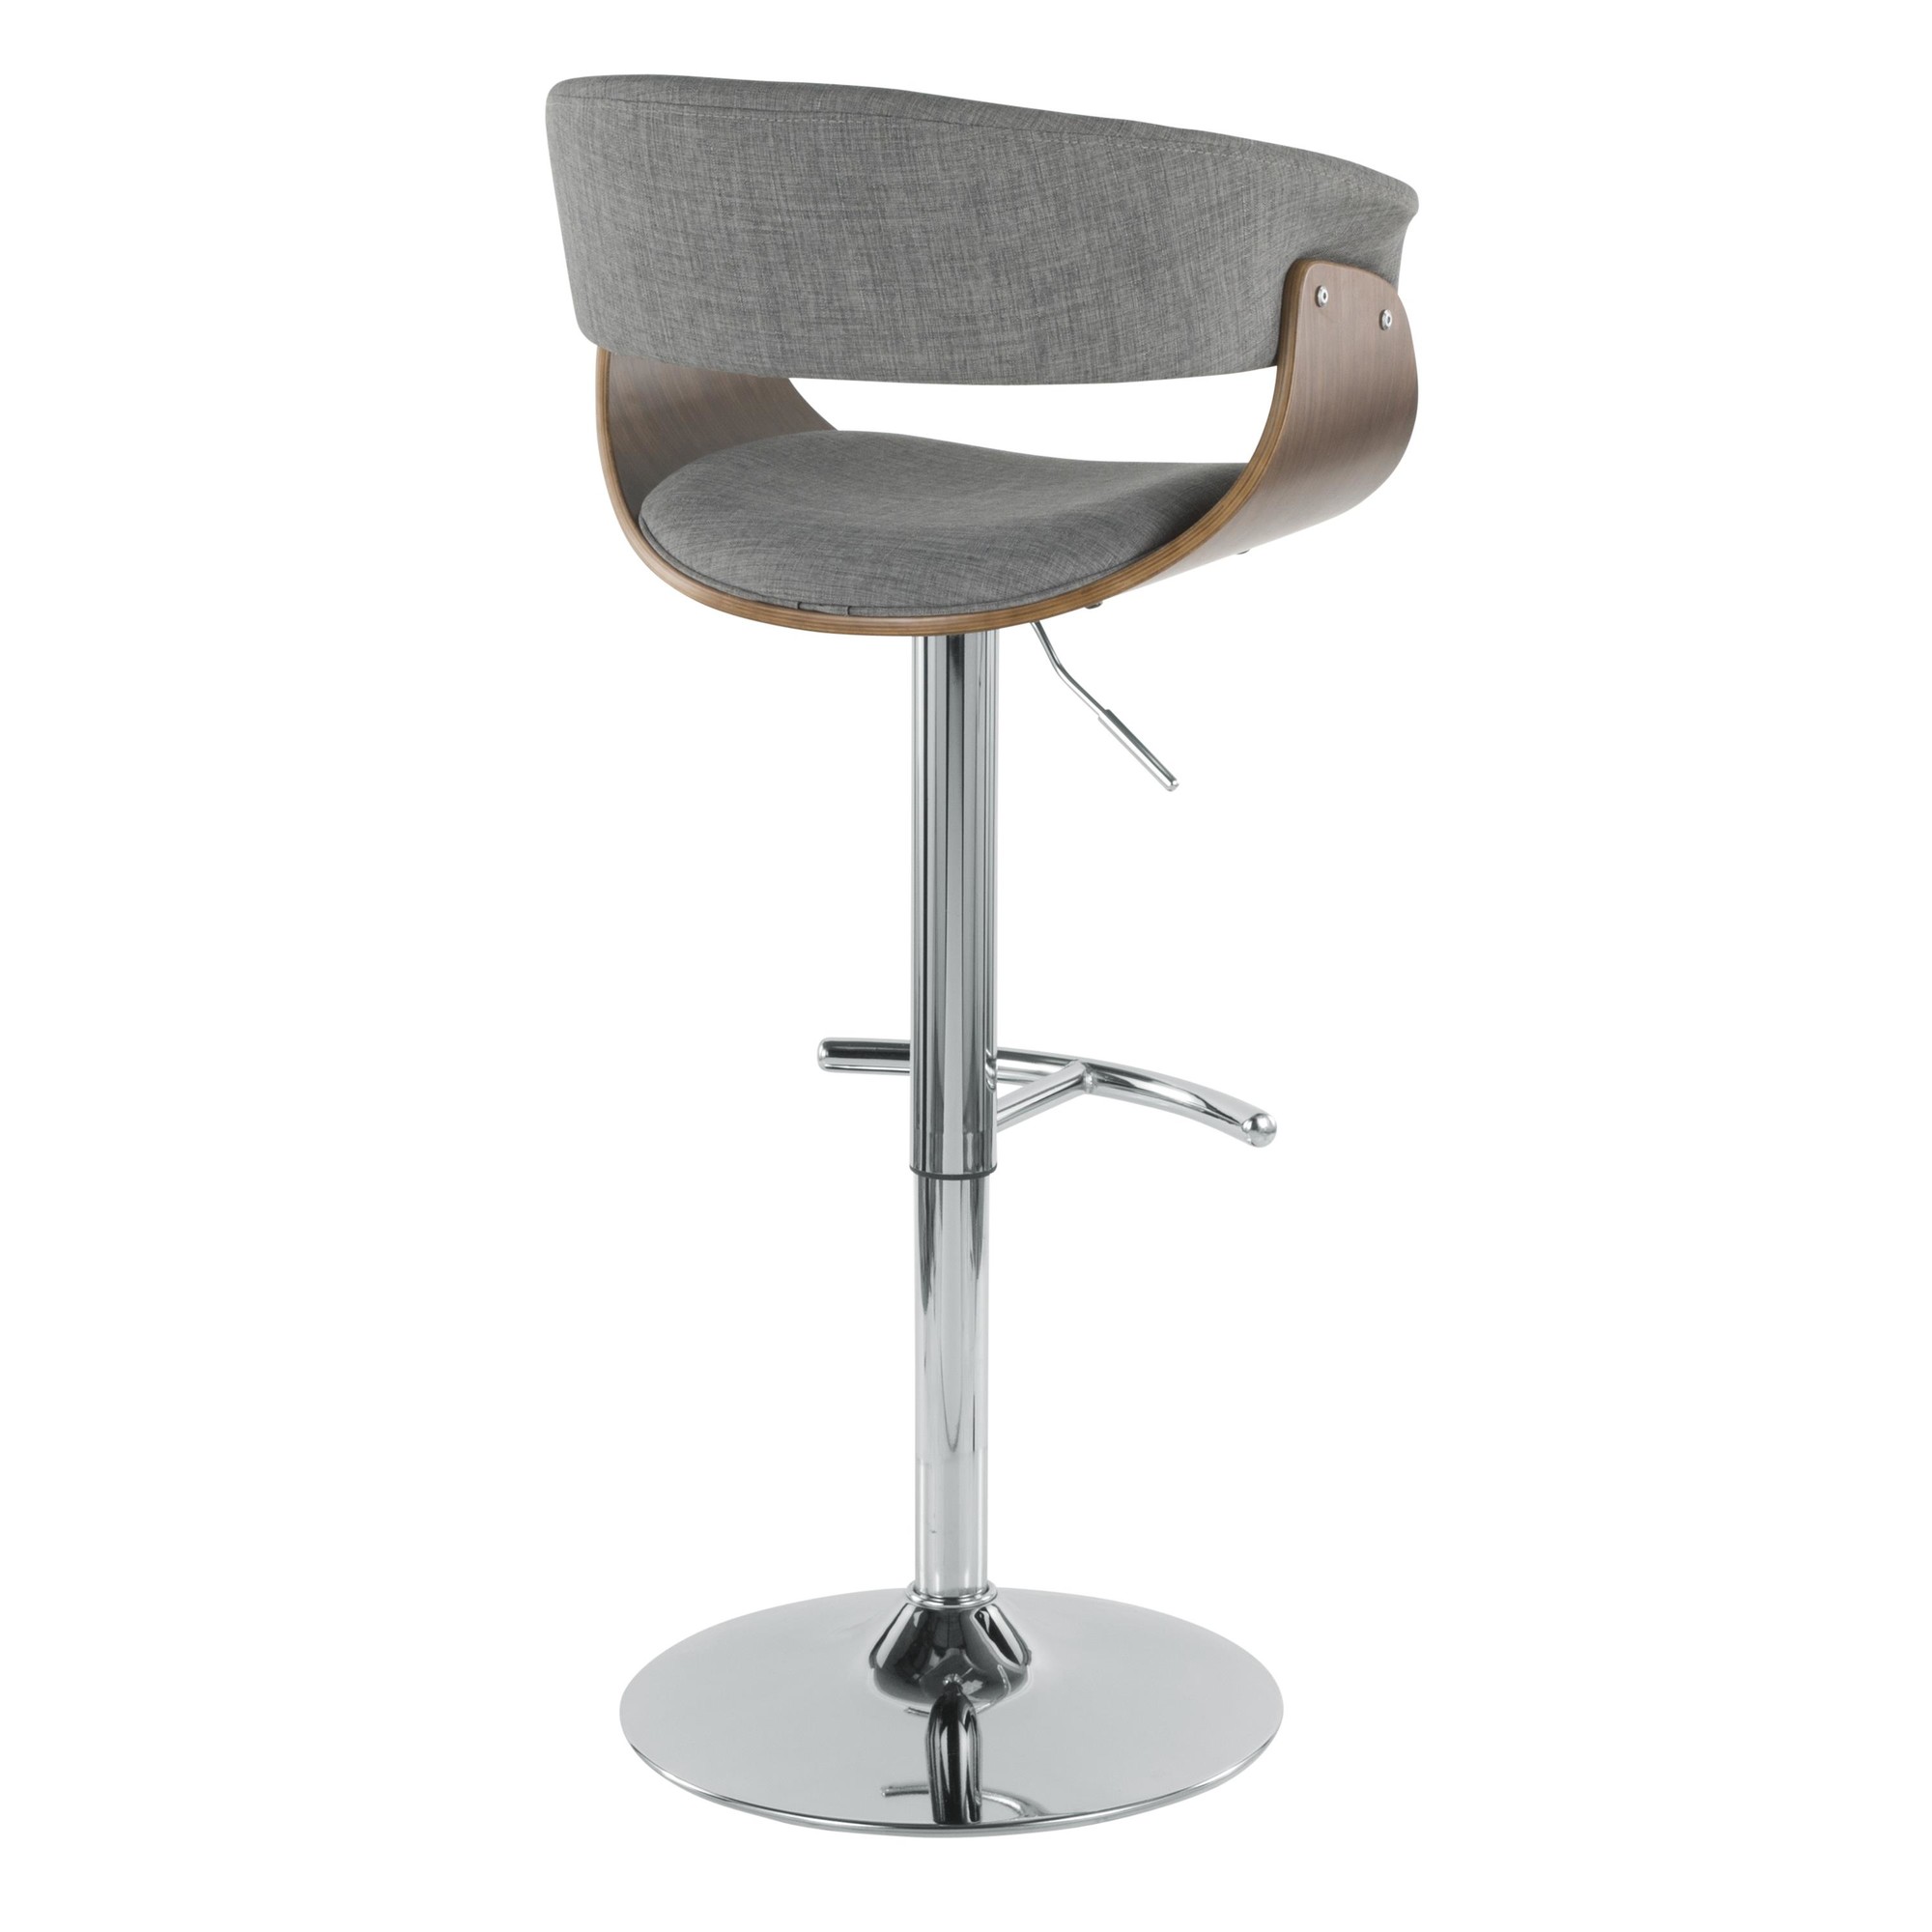 Contemporary Home Living 44.5" Vintage Mod Mid-Century Modern Adjustable Barstool with Swivel in Walnut and Light Grey